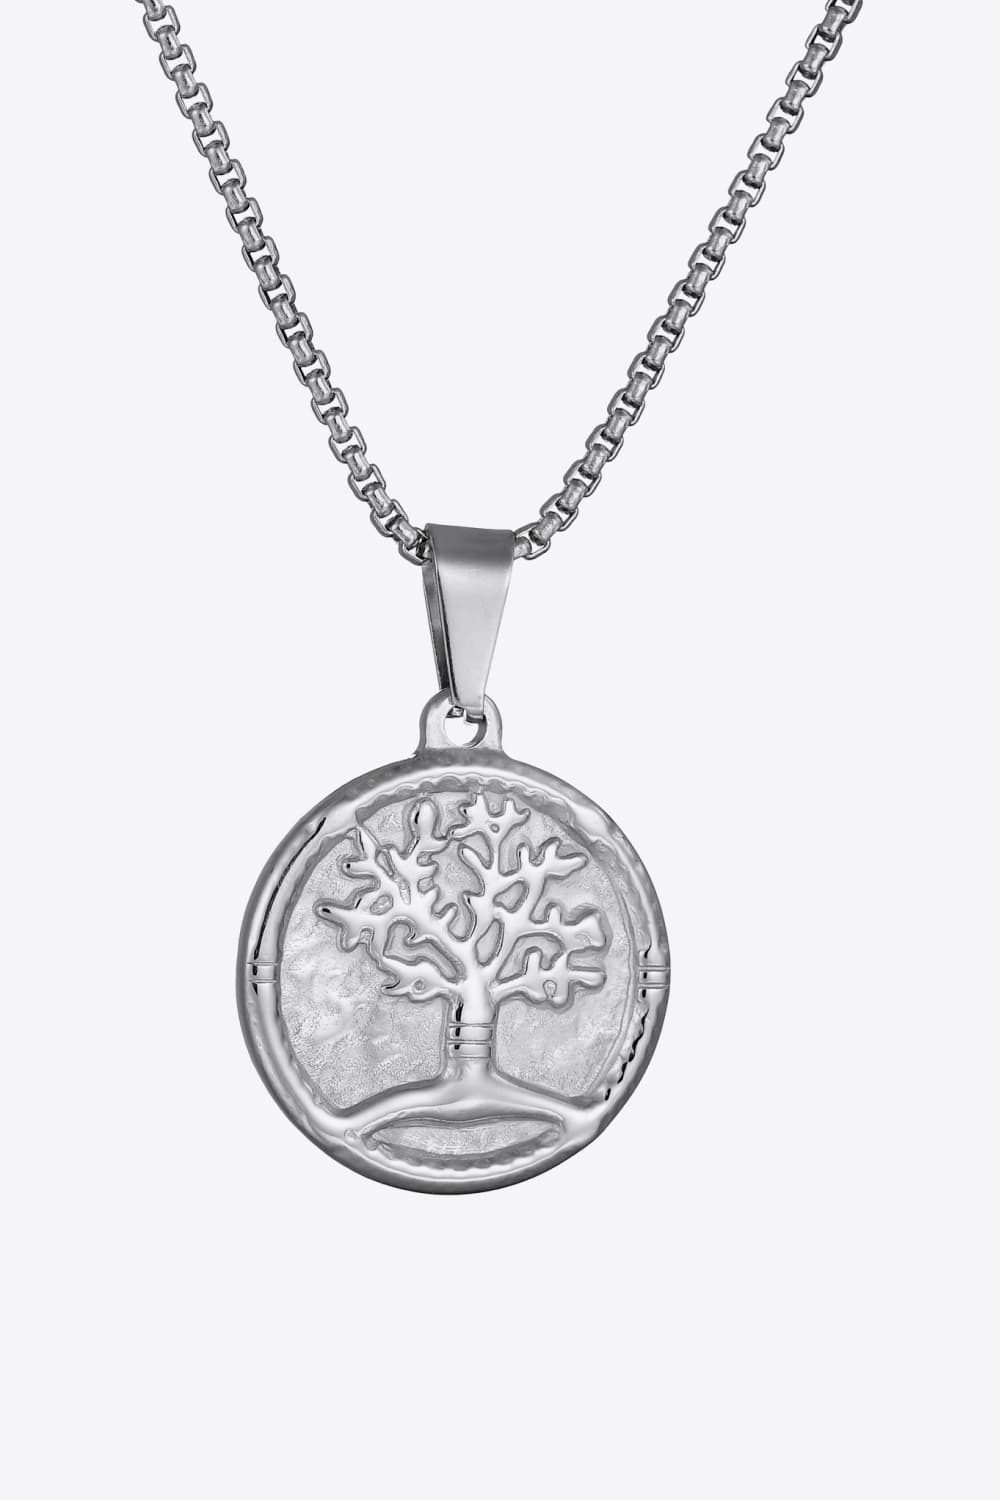 Tree Of Life Pendant Stainless Steel Necklace